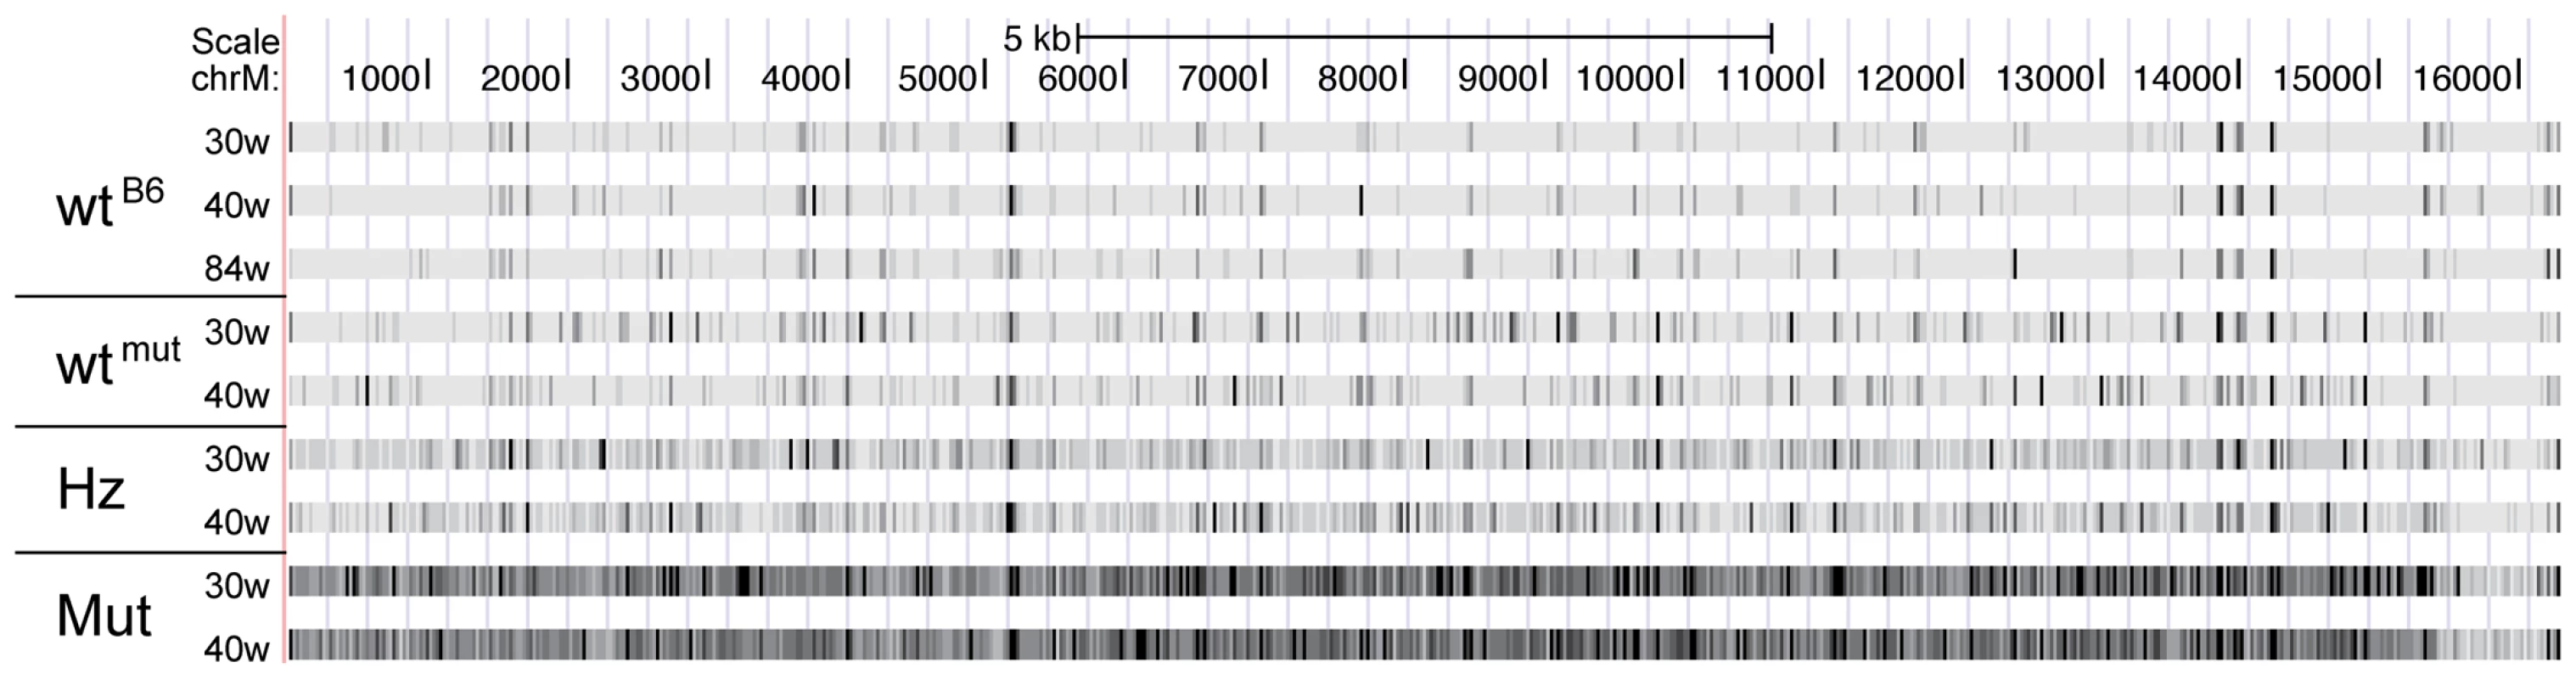 Corrected mutational frequencies viewed in the UCSC genome browser.